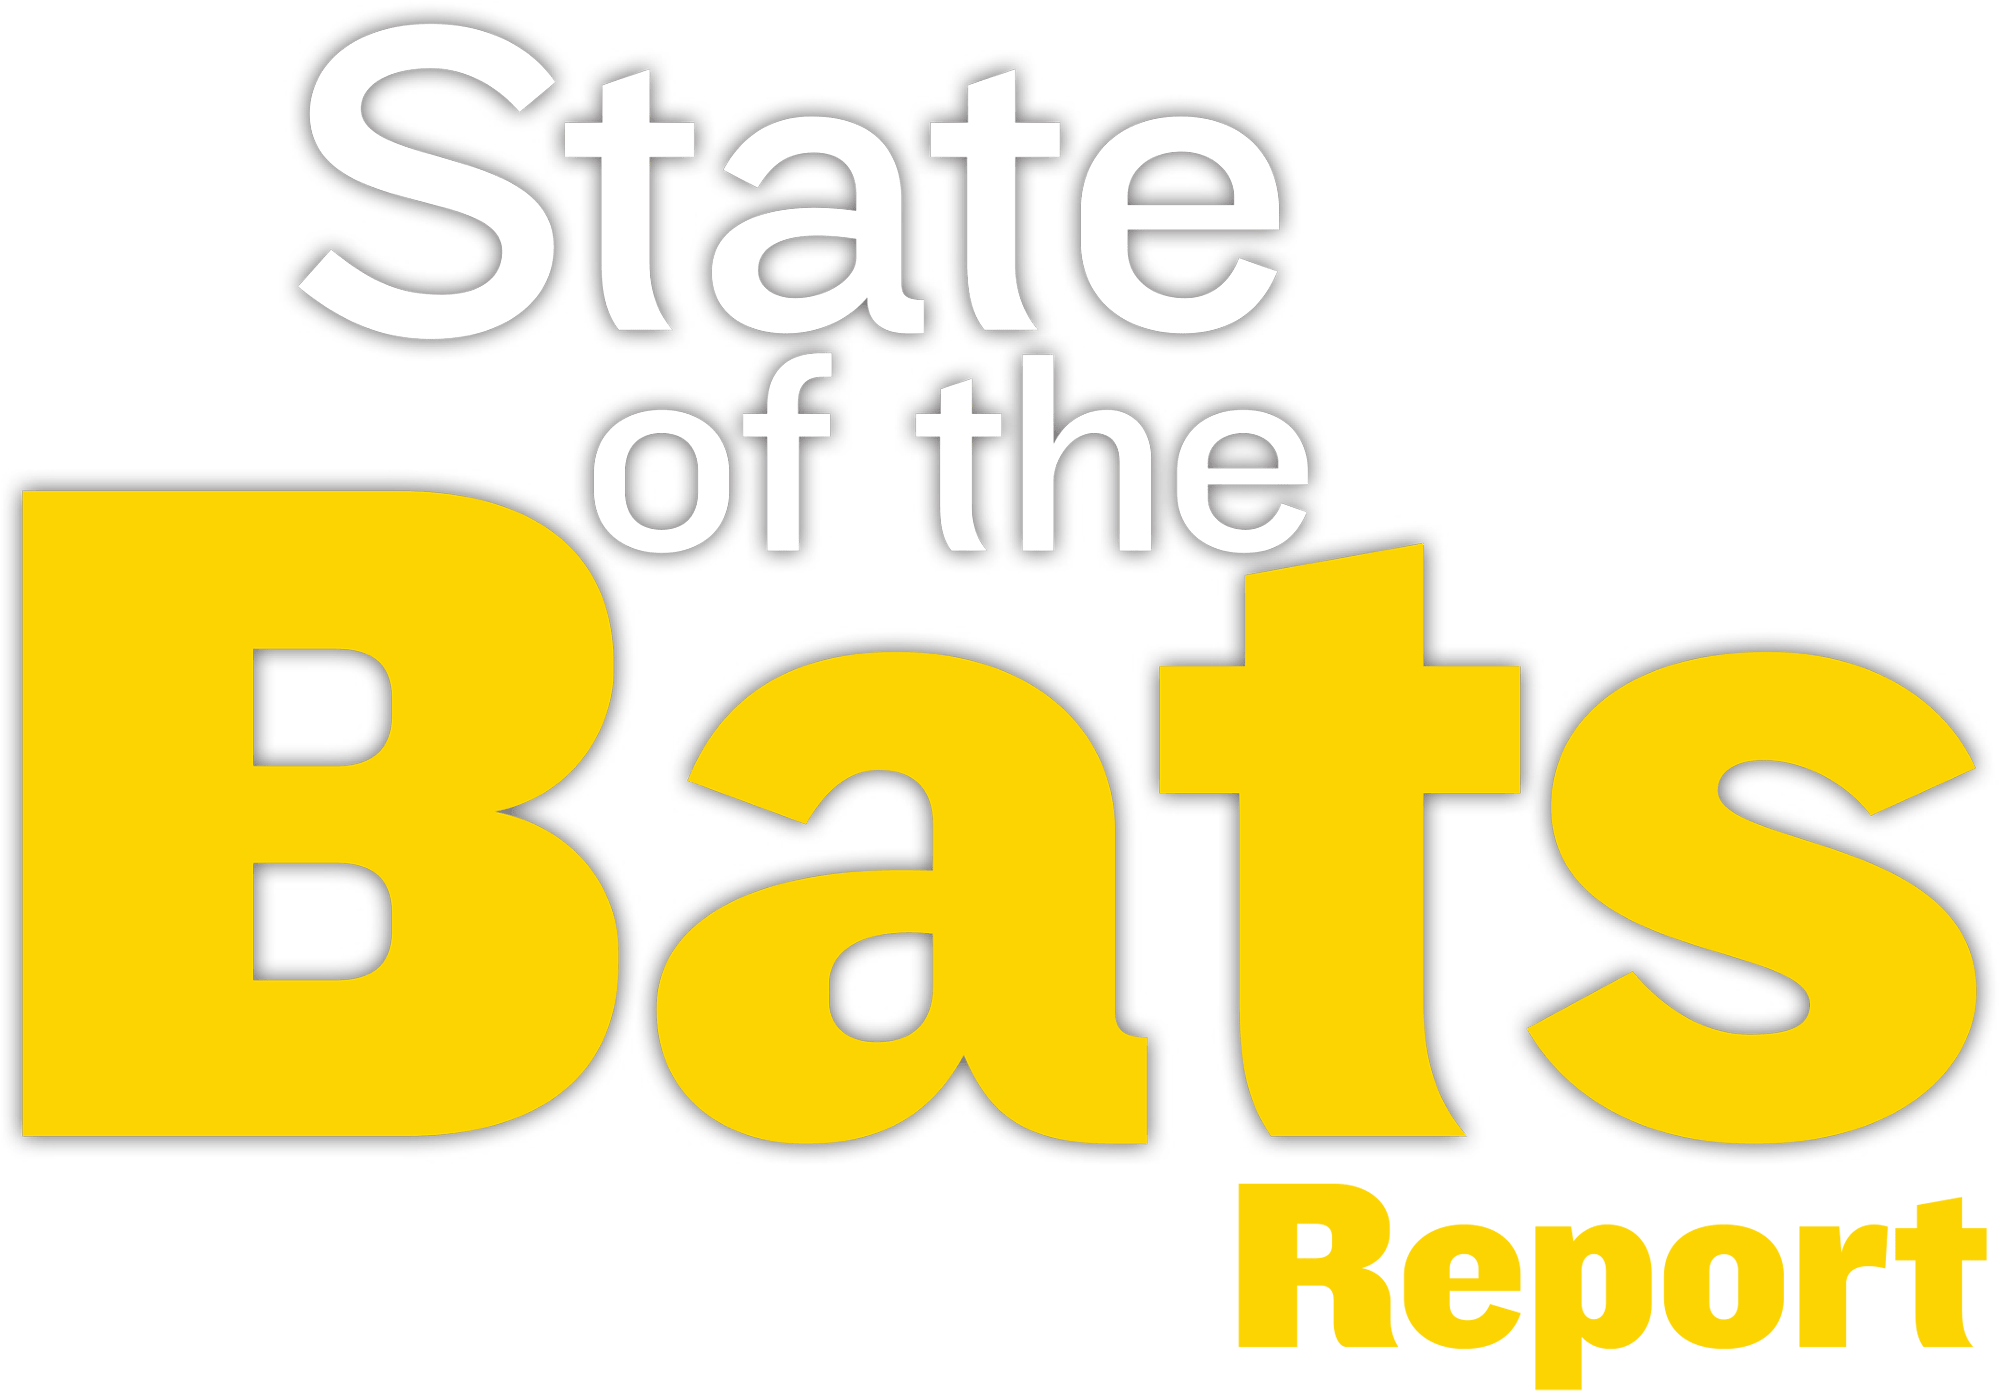 State of the Bats Report typography